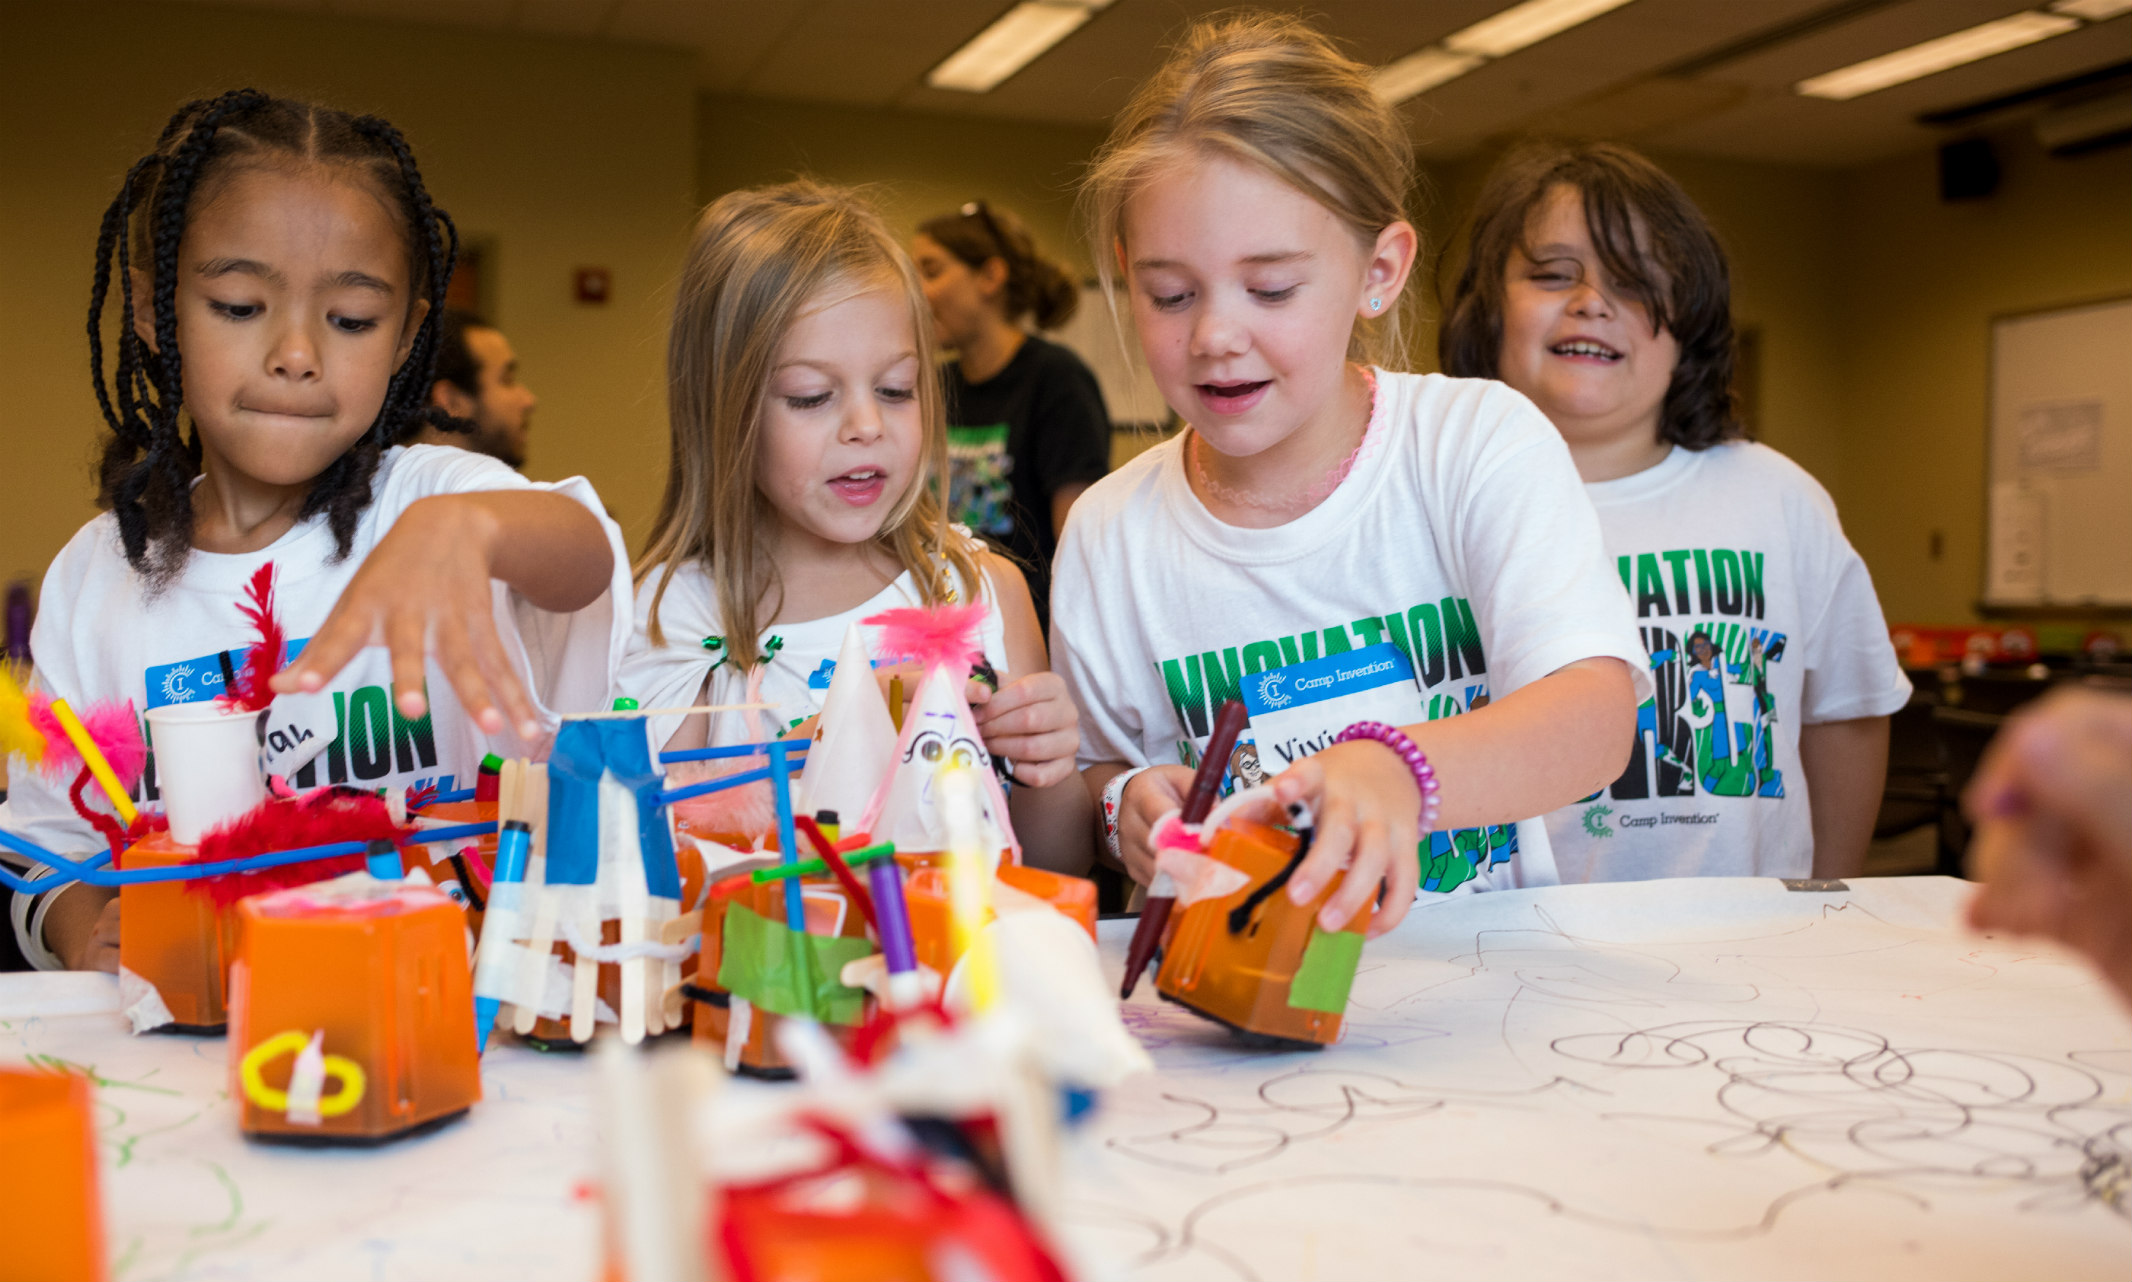 A group of campers creates art with DIY robots